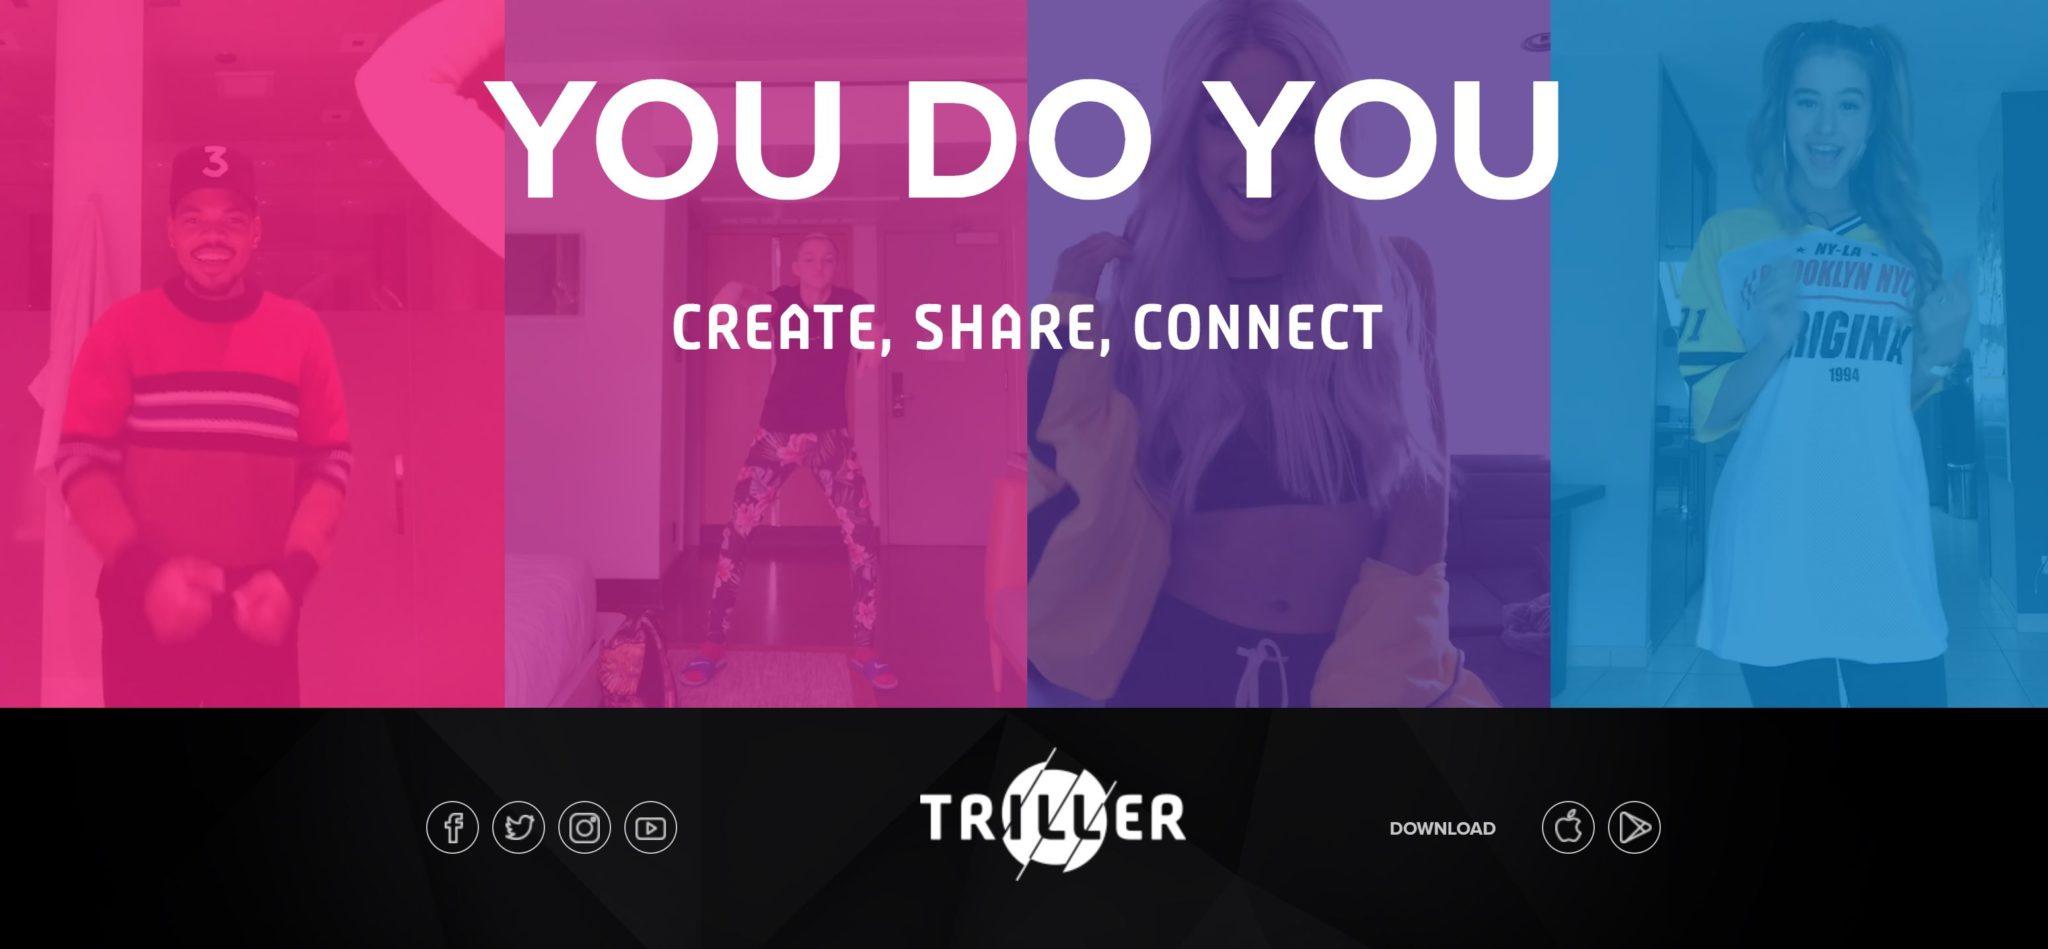 Triller's homepage, featuring Chance the Rapper